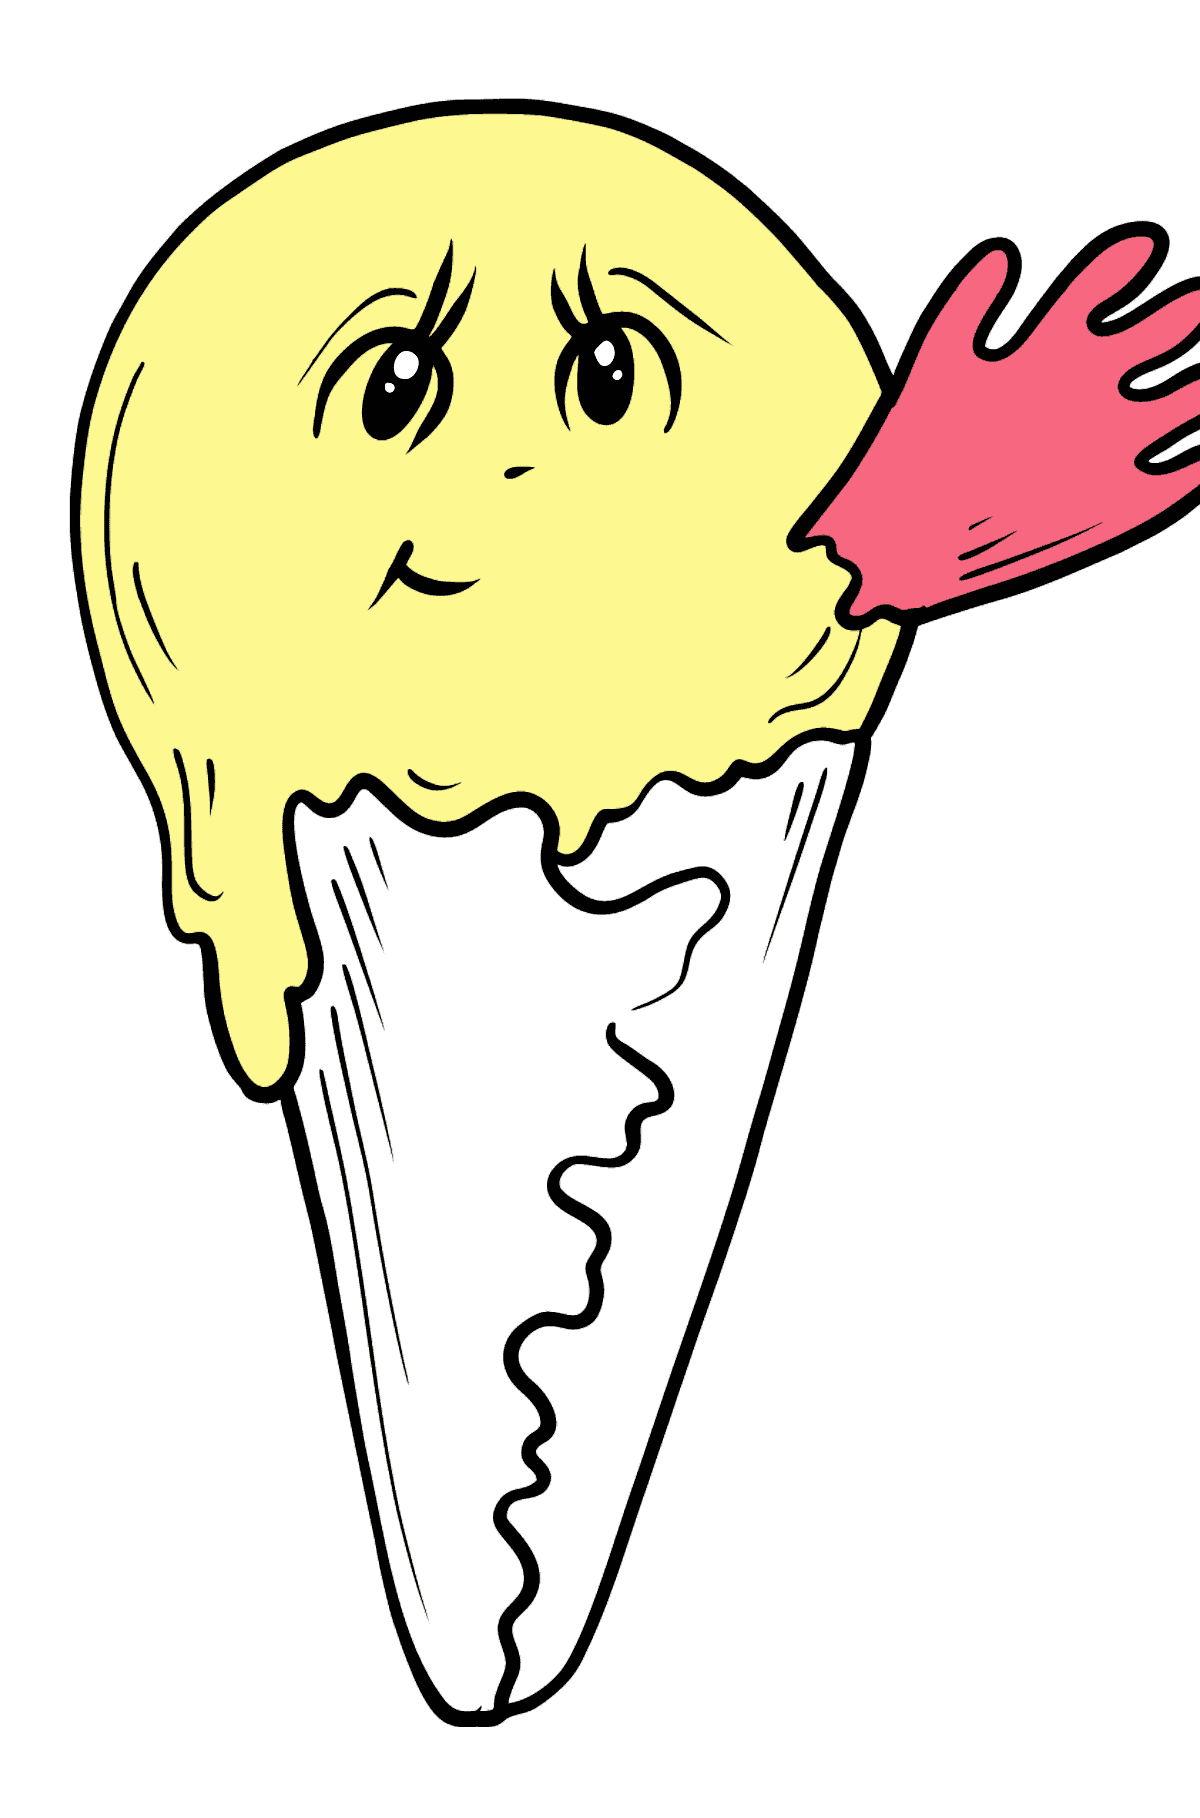 Banana Ice Cream with Eyes coloring page - Coloring Pages for Kids